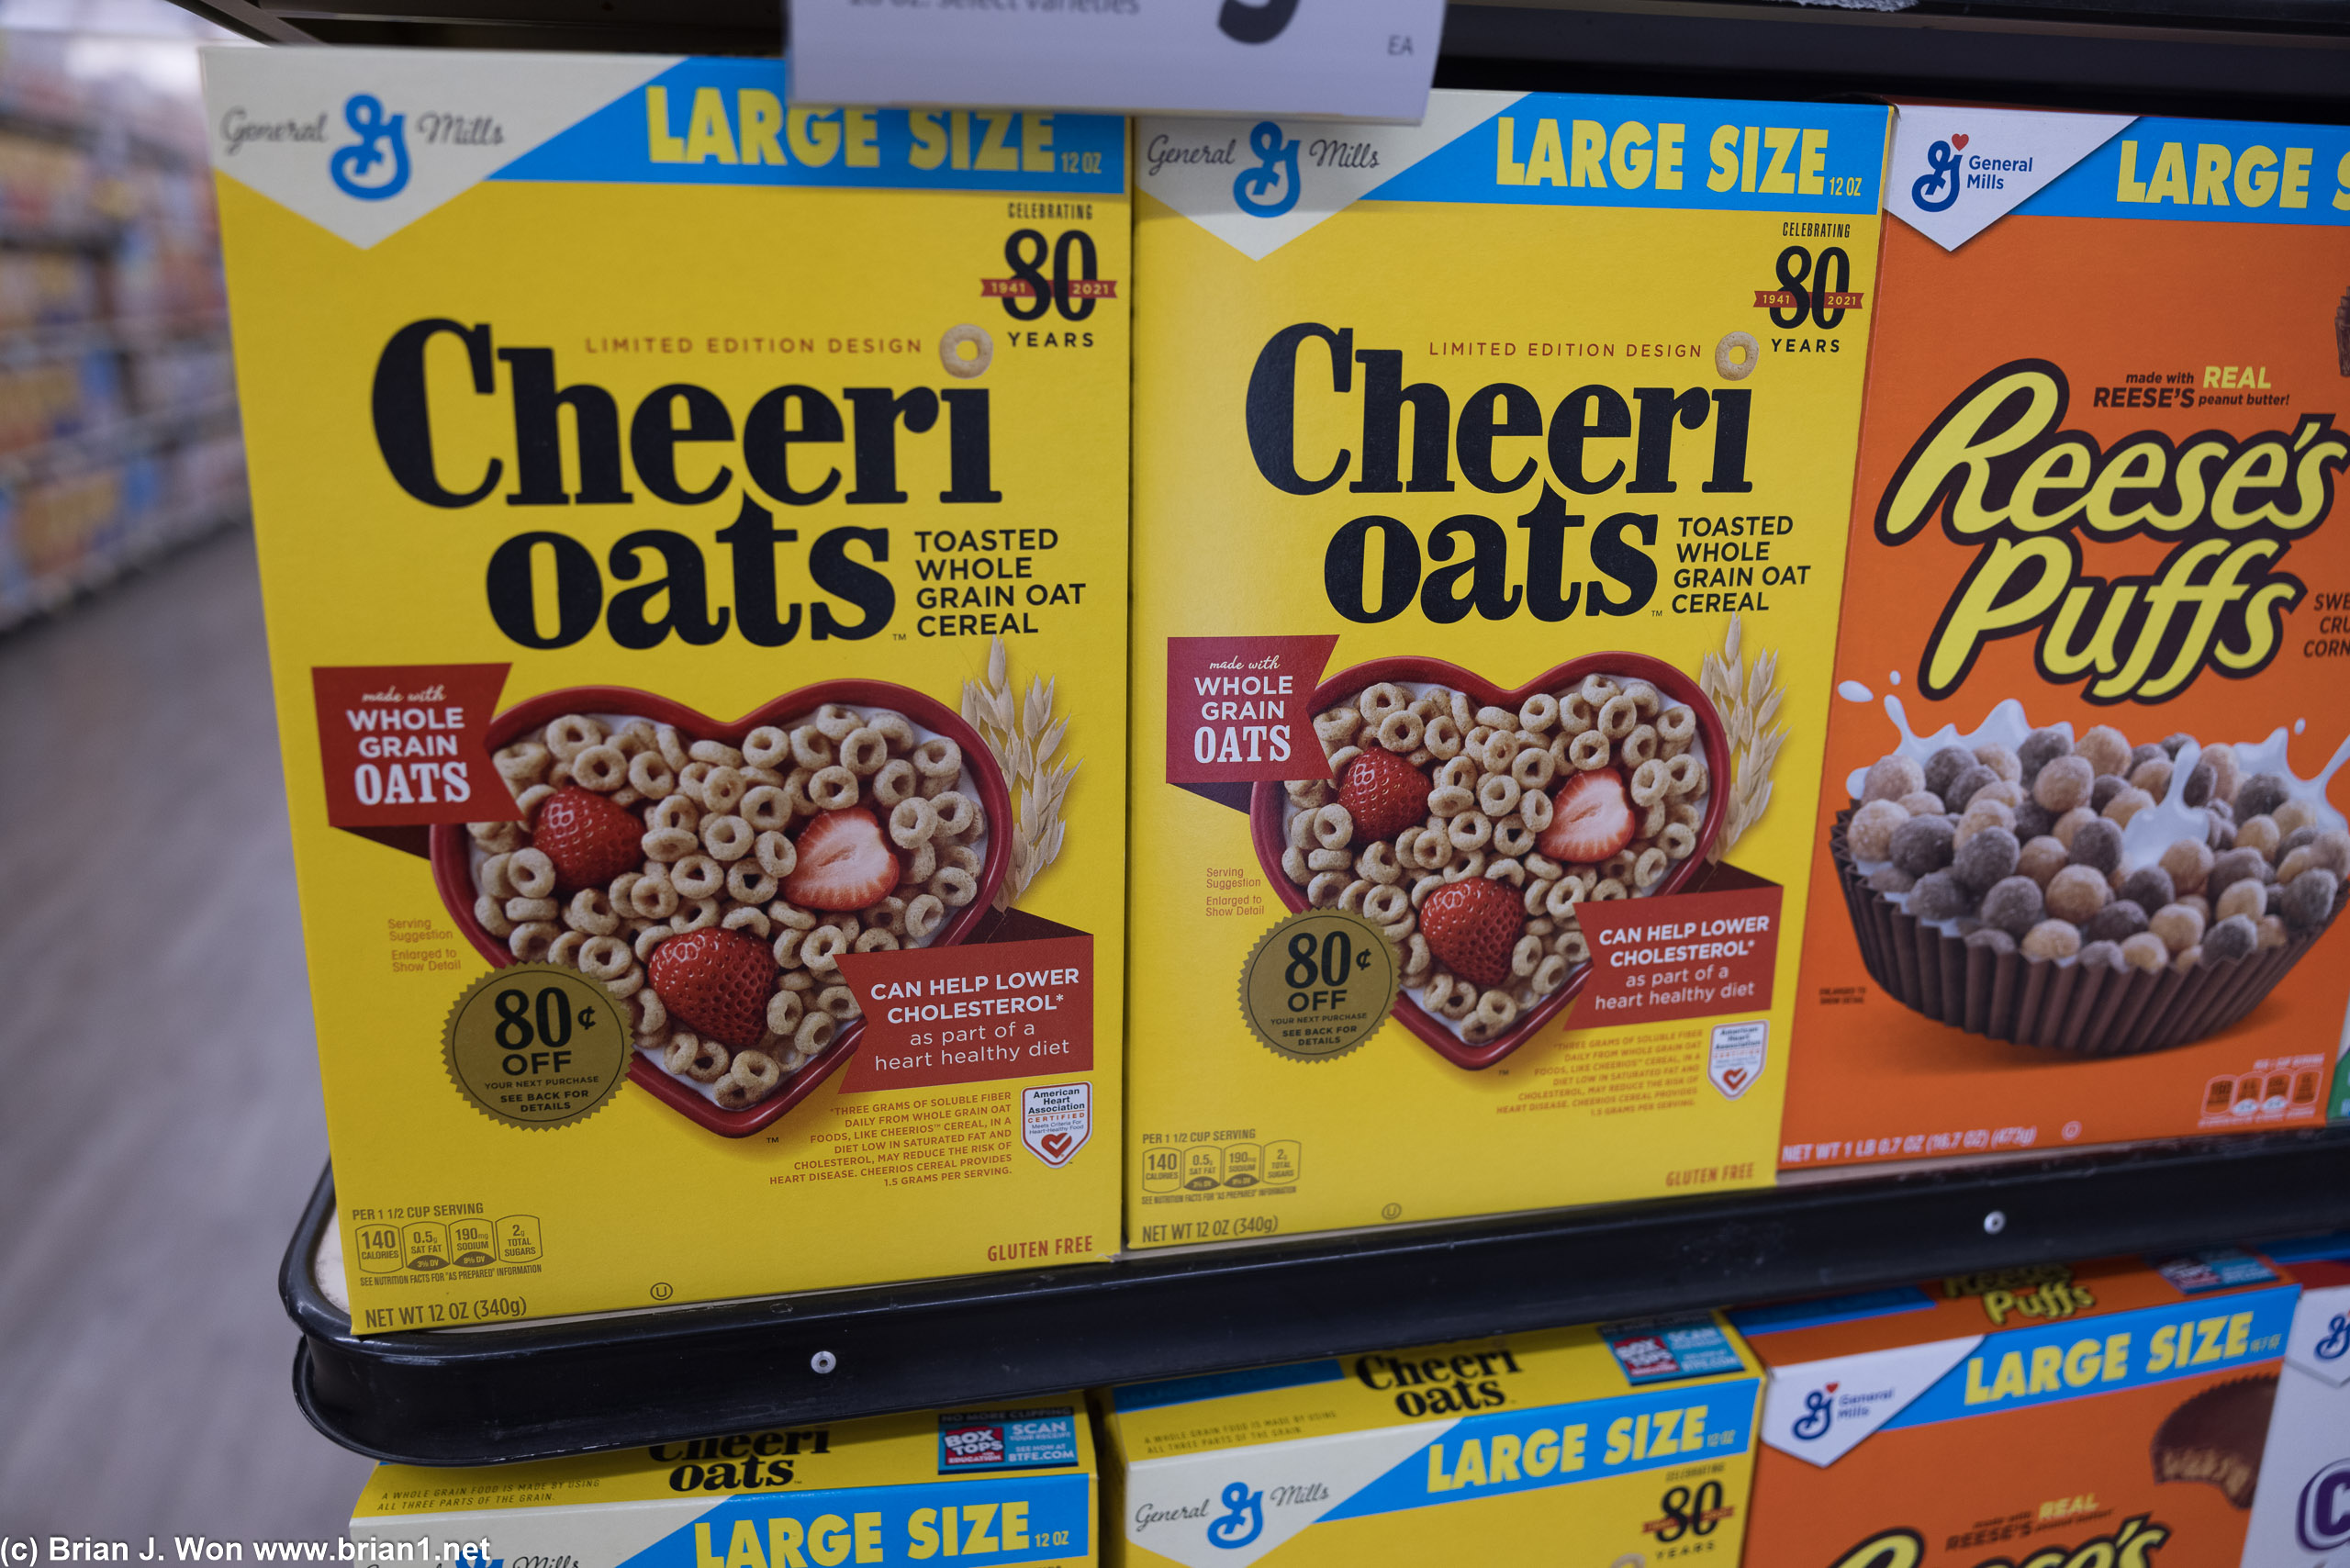 New sizes and new packaging for cereal these days. Ugh.